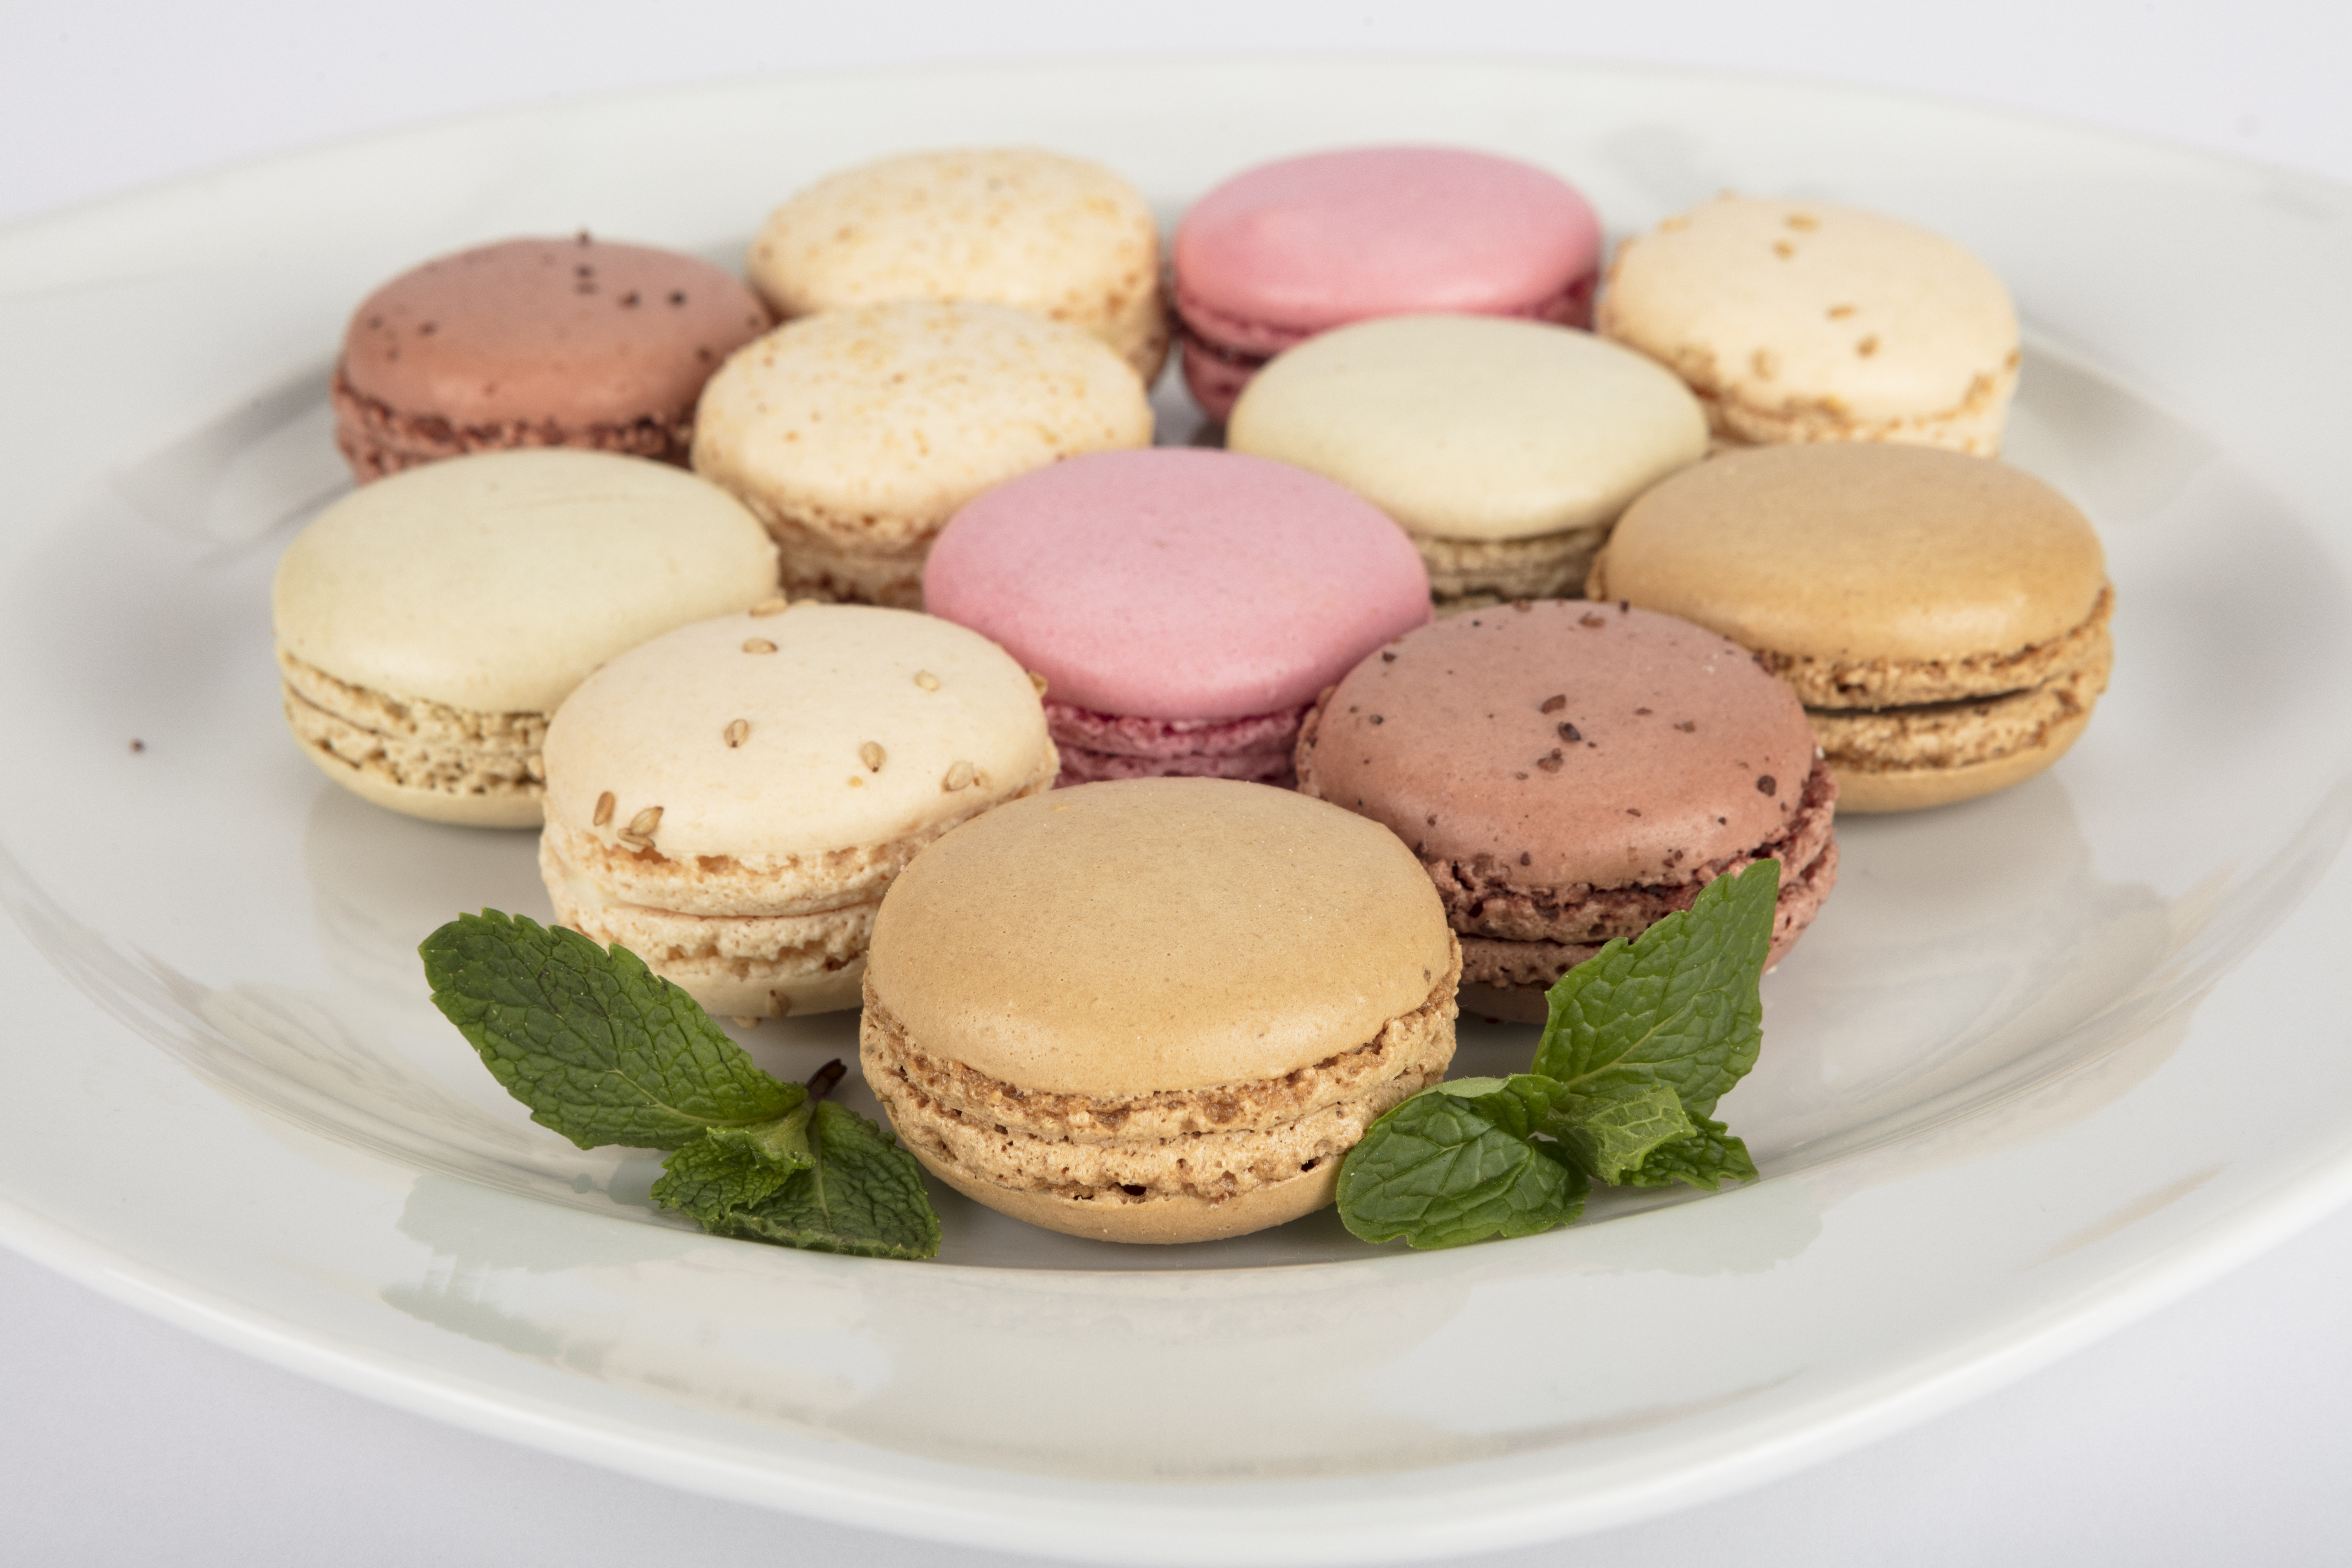 French Macarons at Gelson's Catering